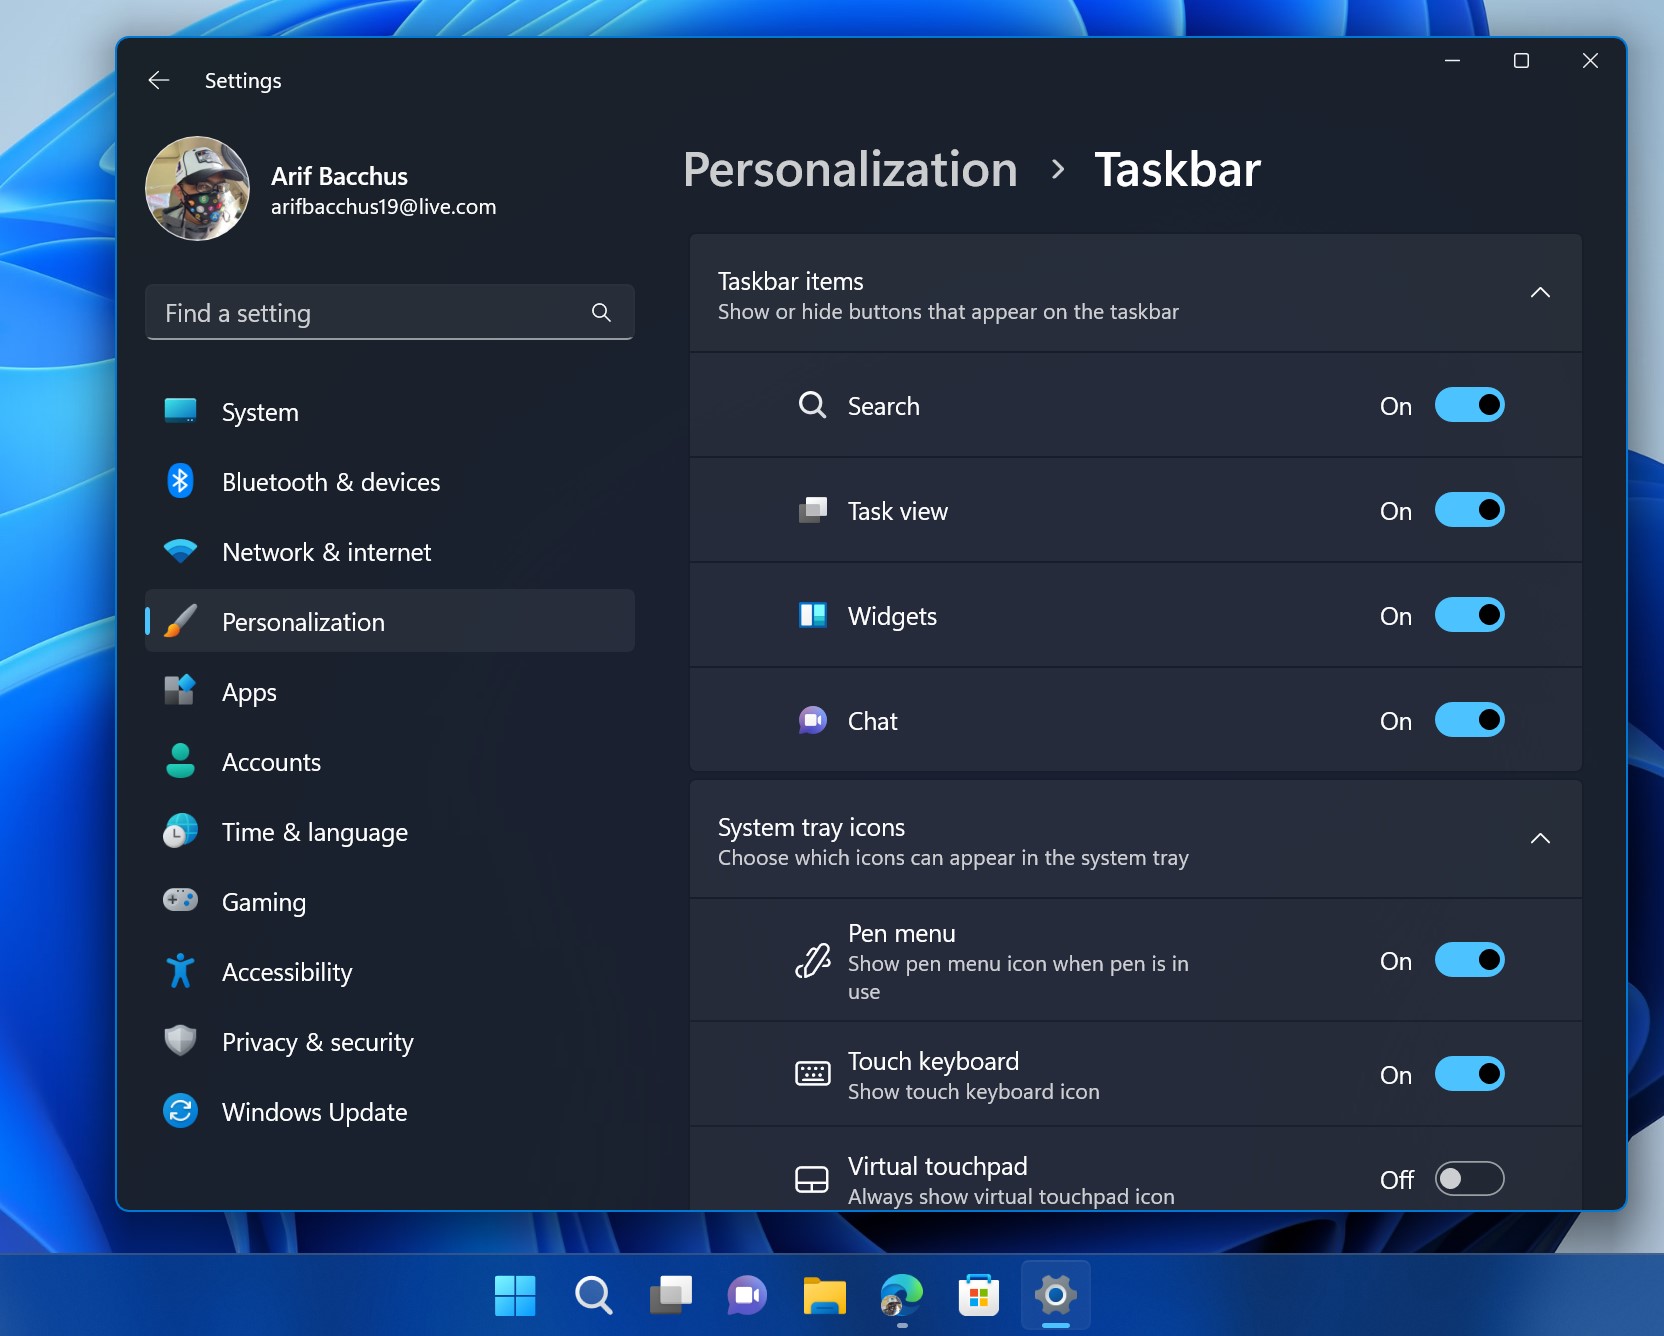 The latest Windows 11 update is rolling out now. Here's what's new